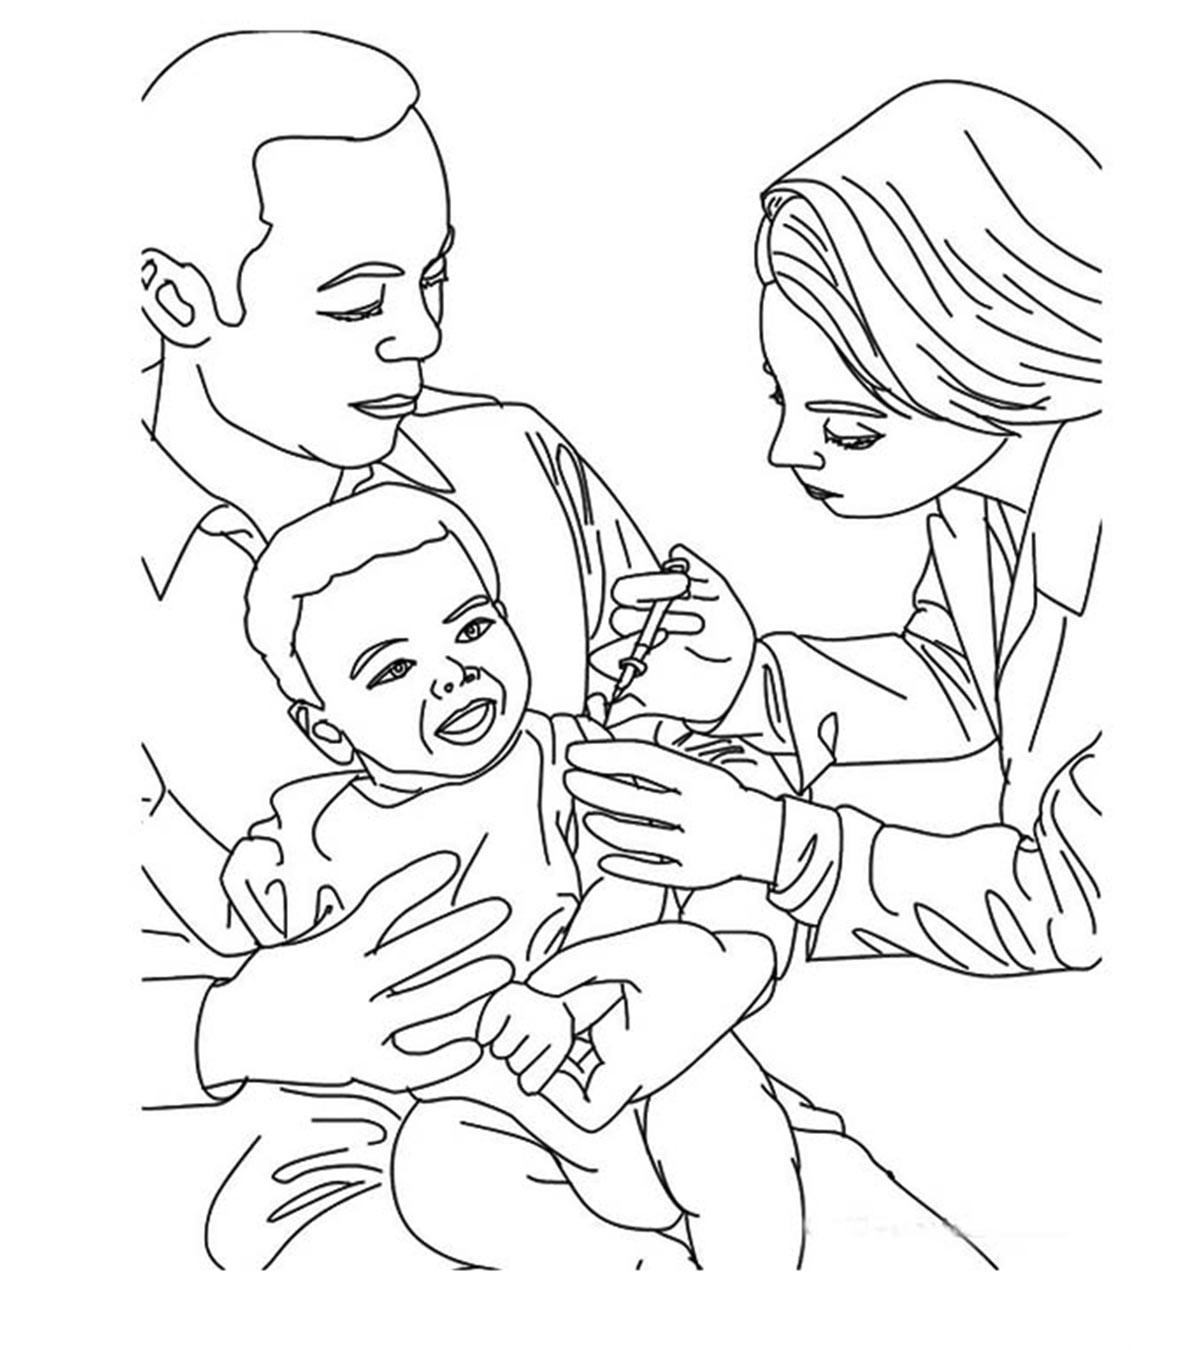 Top 10 Doctor Coloring Pages Your Toddler Will Love To Color_image